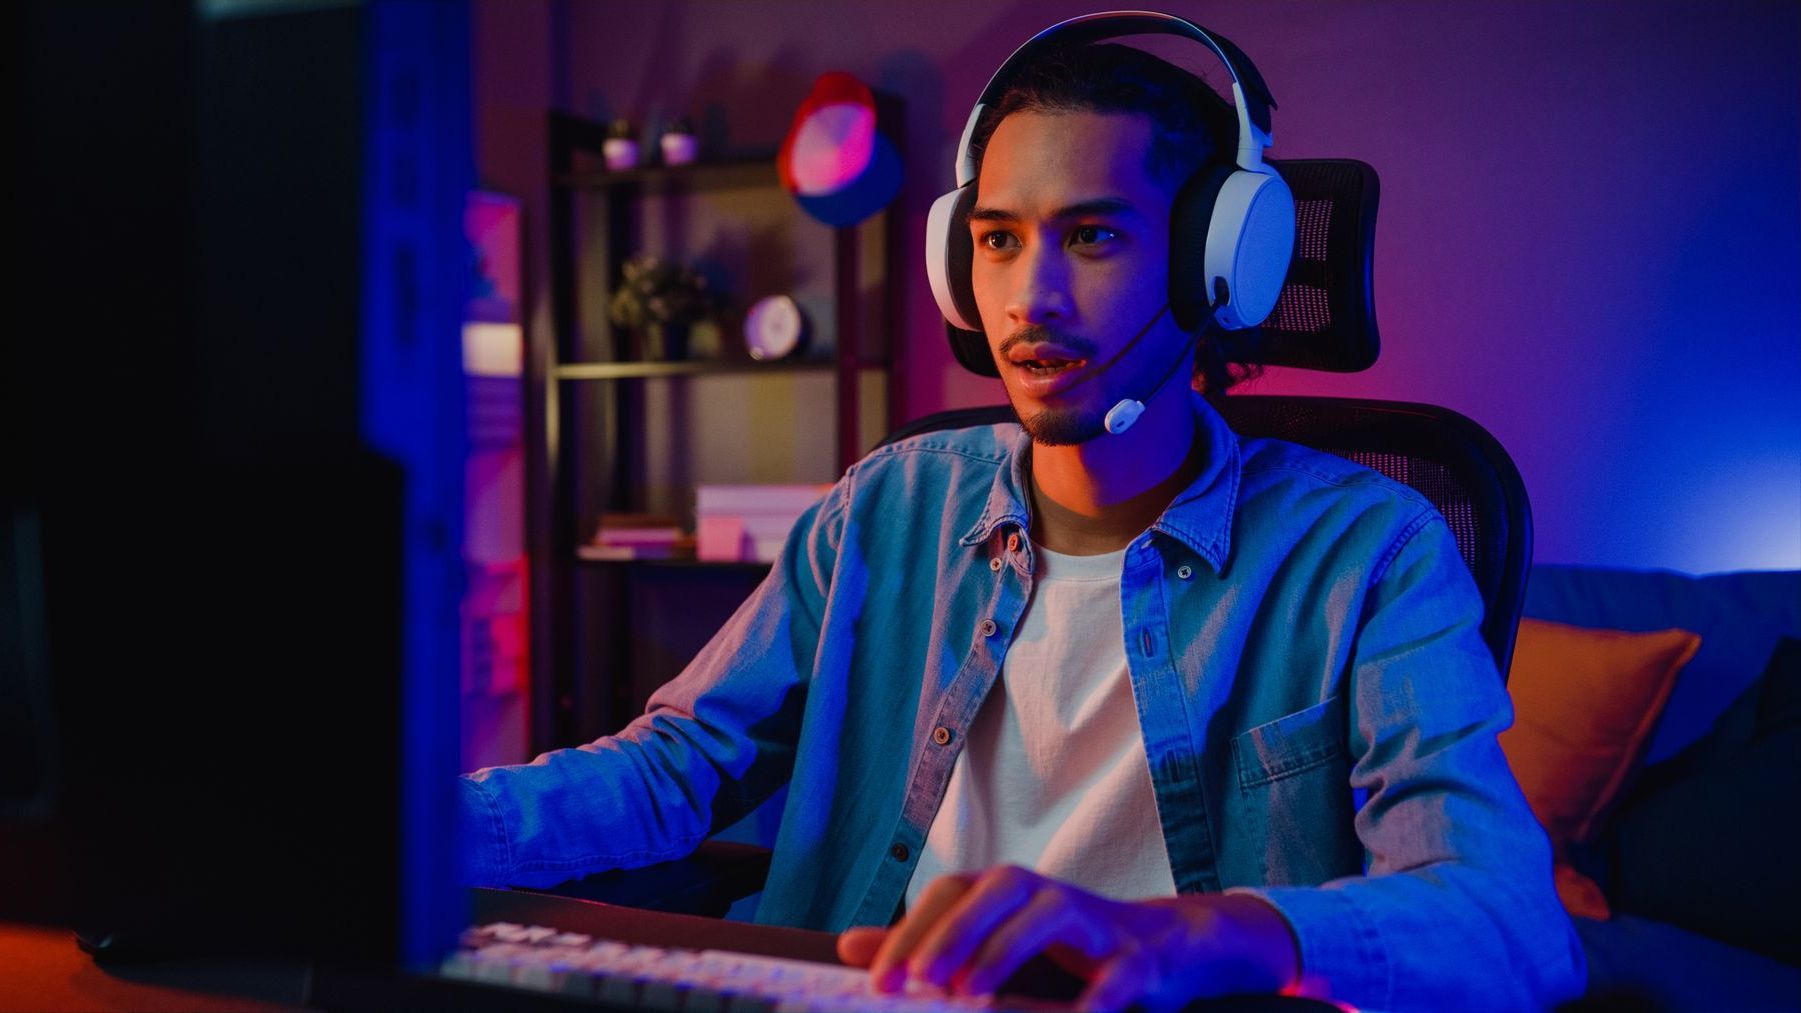 Man sitting in an Ergohuman gaming chair playing at his PC. He is wearing white headphones with a mouthpiece and looks intensely at the screen. The lighting is low and moody with a pink and blue glow. 